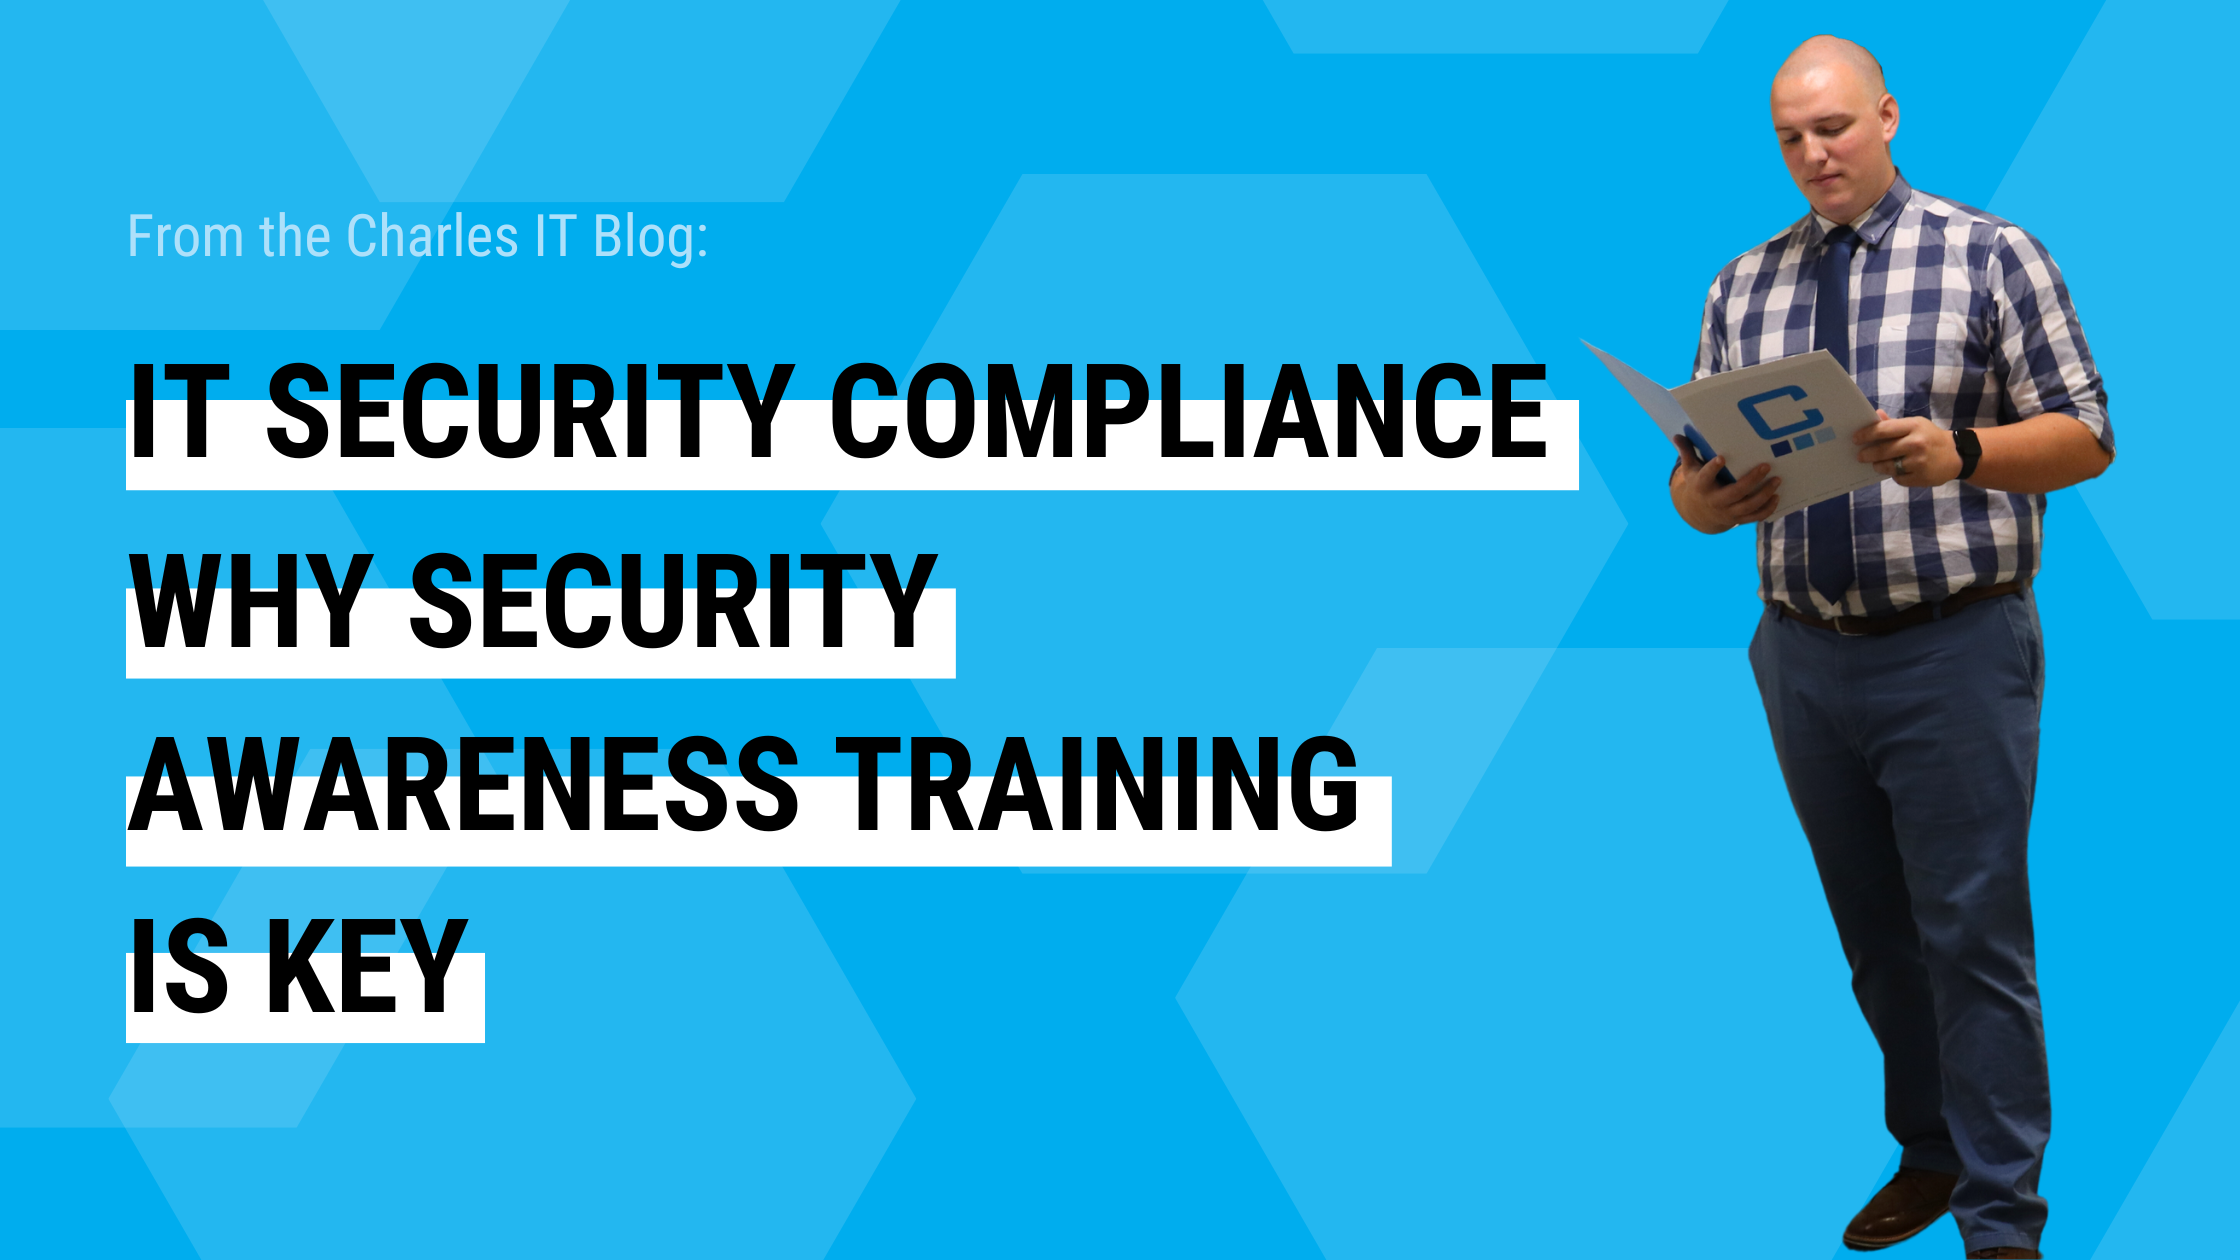 IT Security Compliance: Why Security Awareness Training is Key